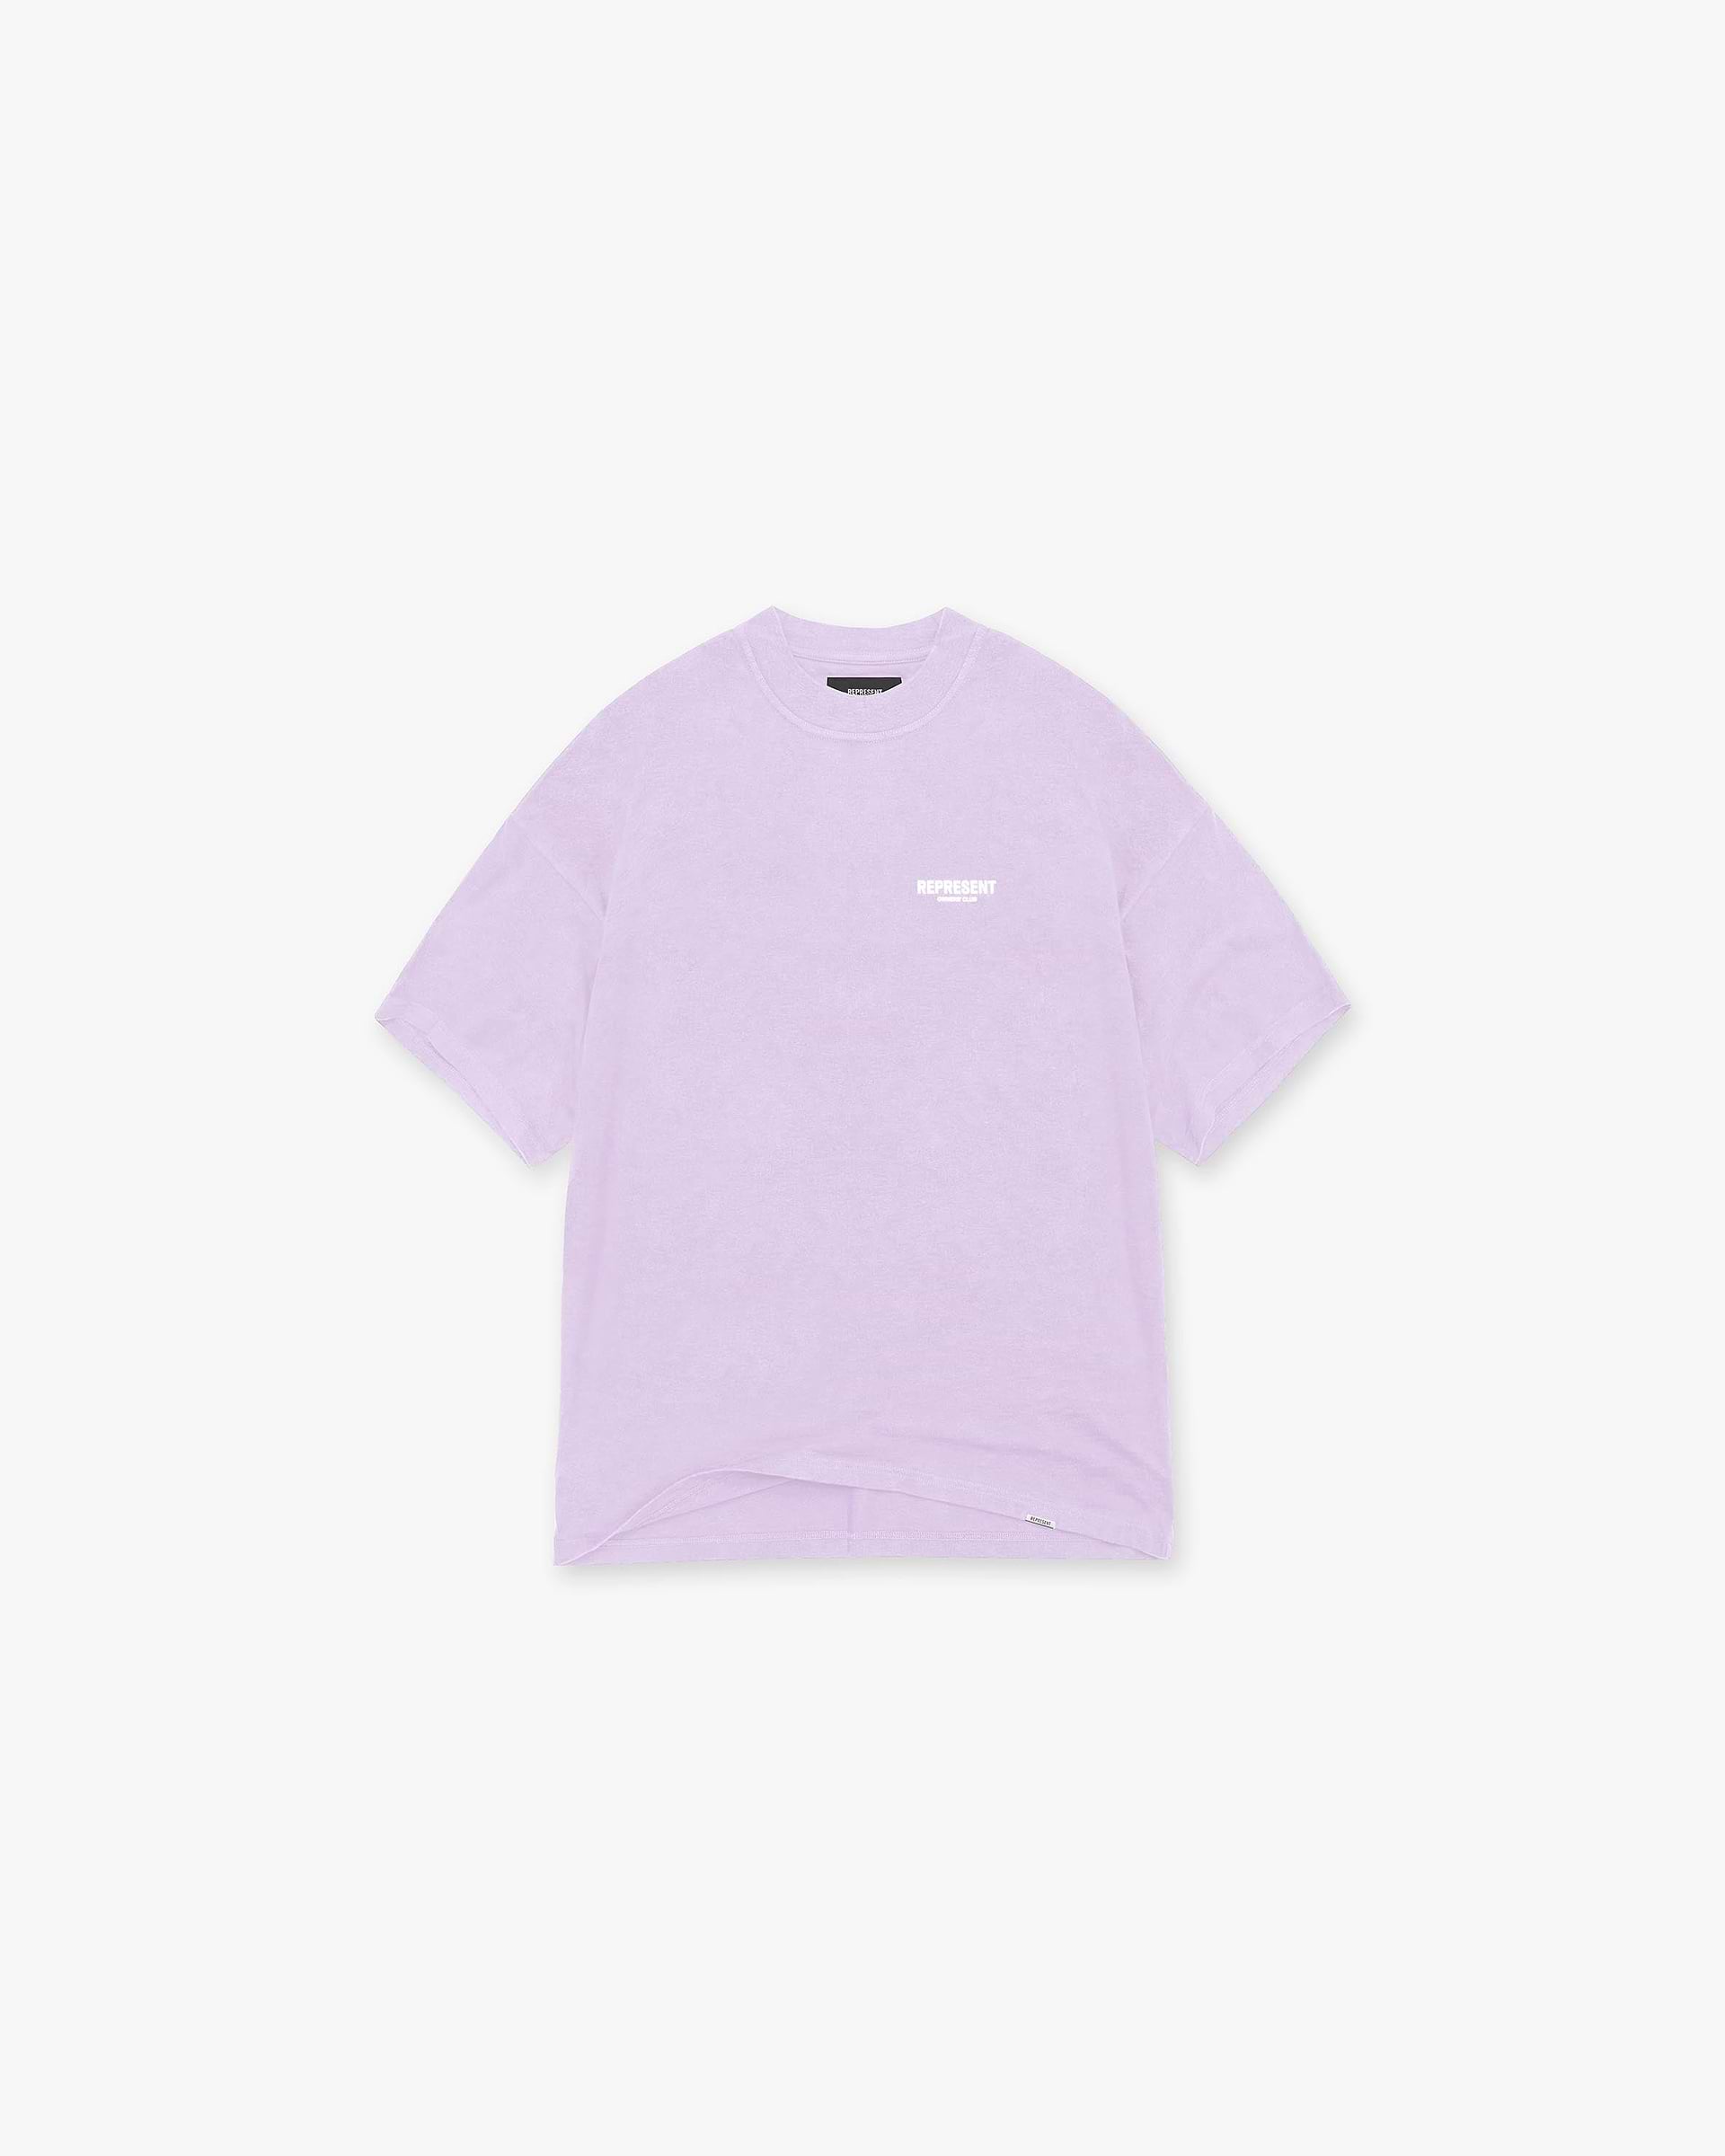 Represent Owners Club T-Shirt | Lilac T-Shirts Owners Club | Represent Clo